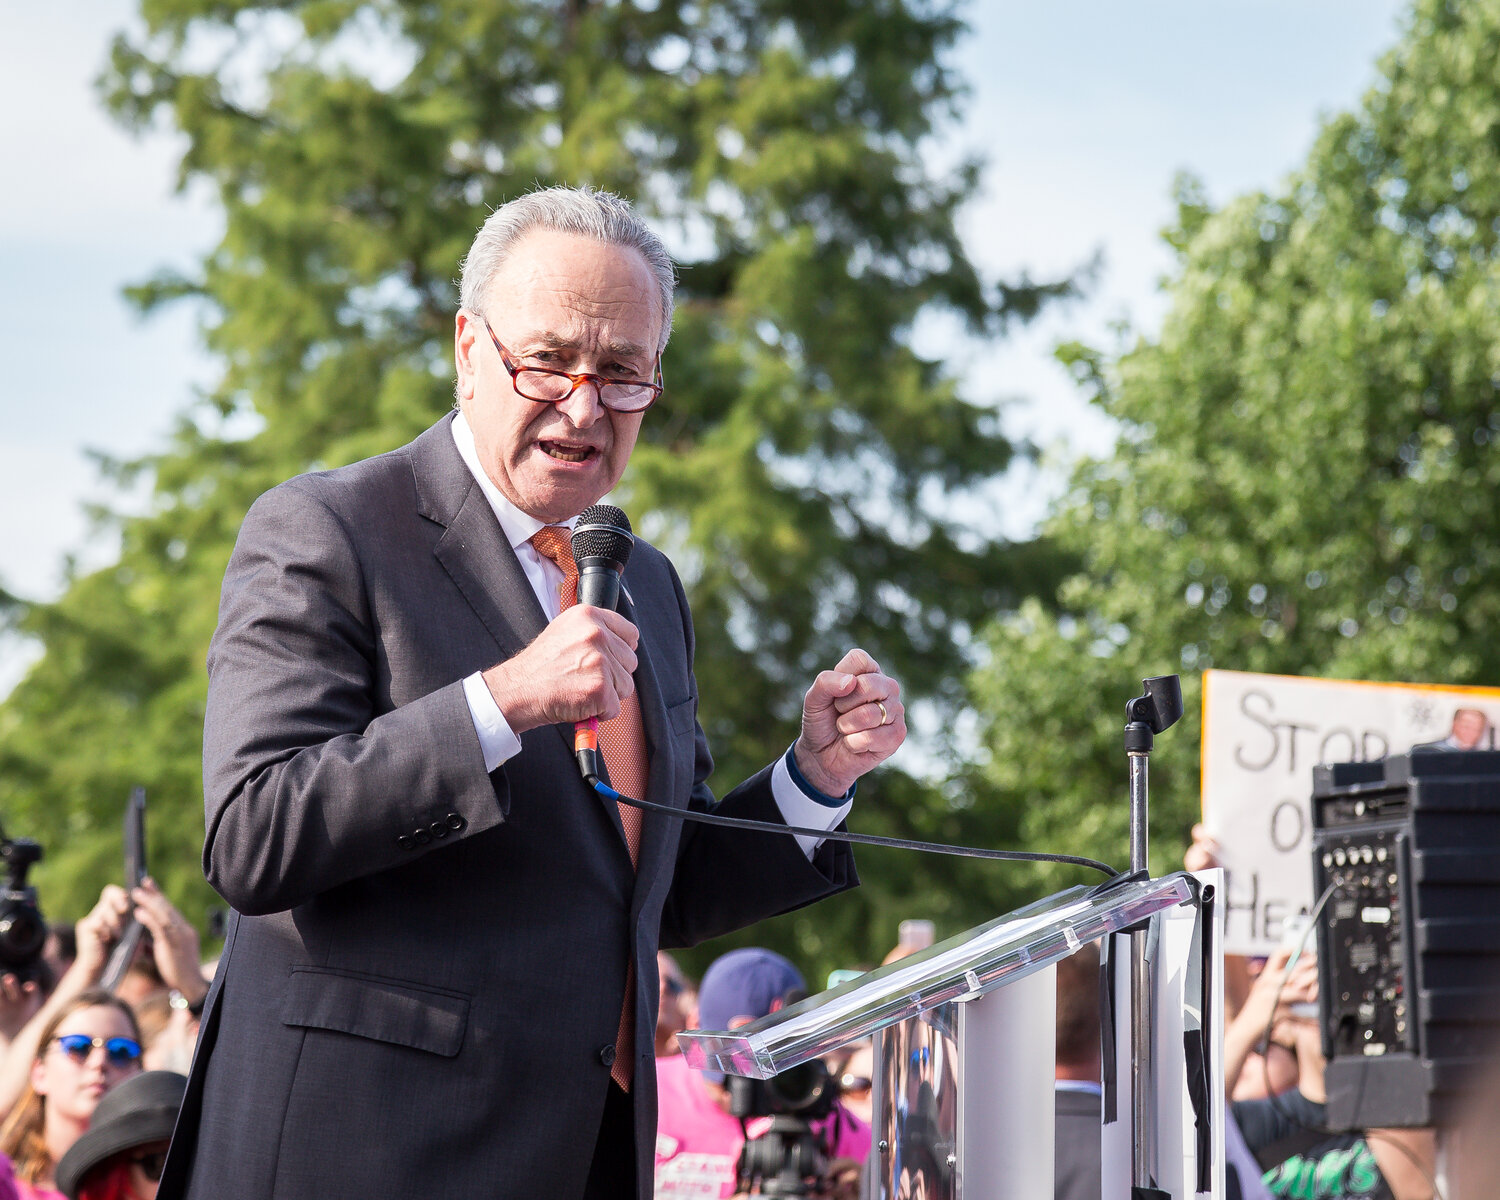 "Linking Together: March to Save Our Care" Rally at the U.S. Capitol on June 28, 2017.  Democratic Party Leaders and others spoke to defend the Affordable Care Act and to defeat Republican Party efforts to repeal so called "Obama Care" and replace it with "Trump Care" alternatives.